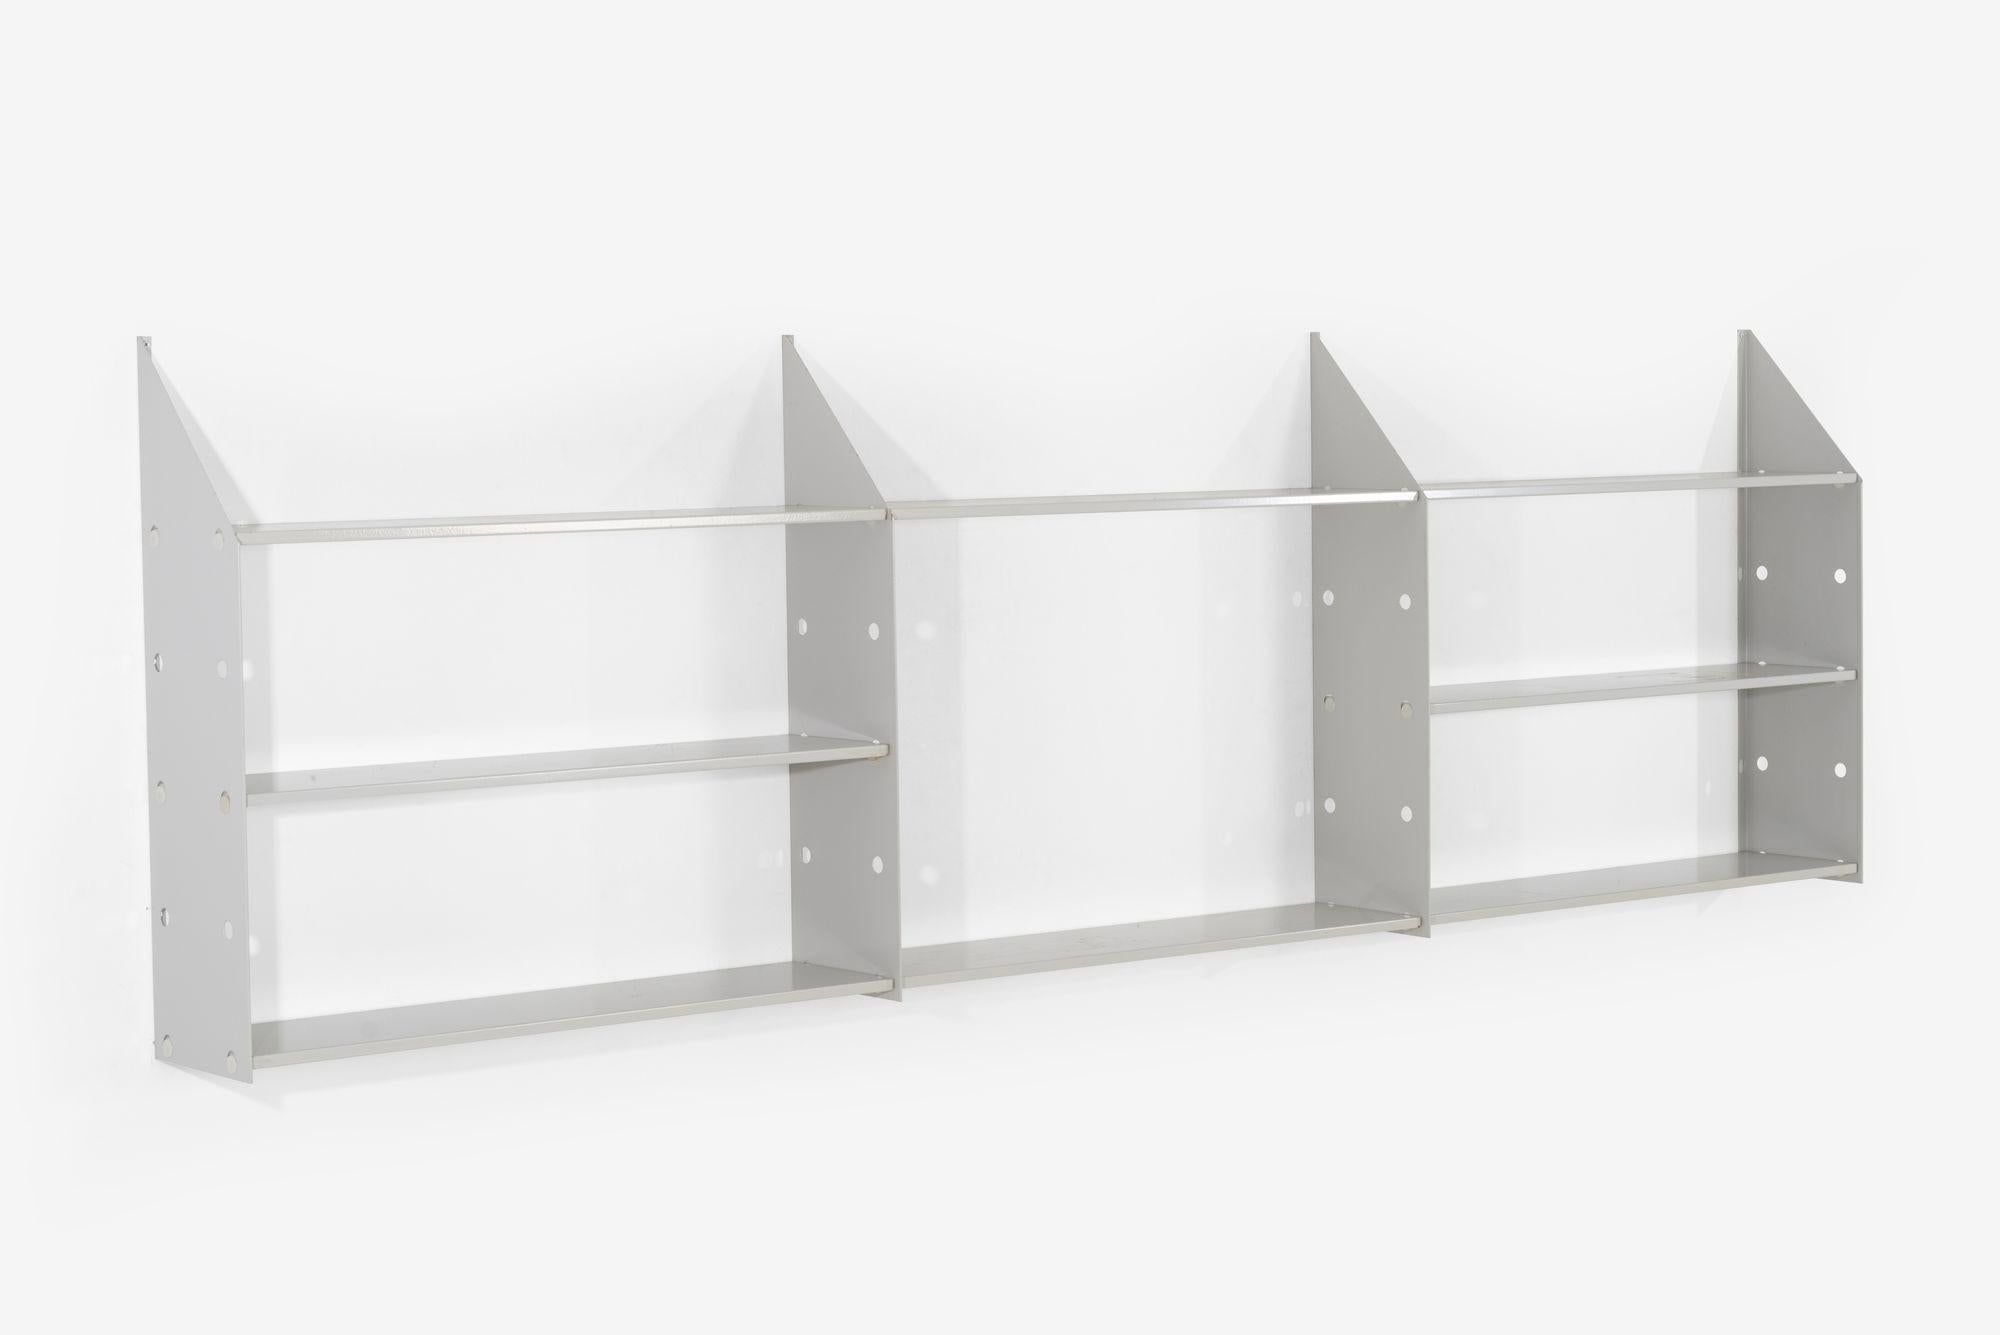 Enzo Mari Dima Modular Wall Shelving System In Good Condition For Sale In Chicago, IL